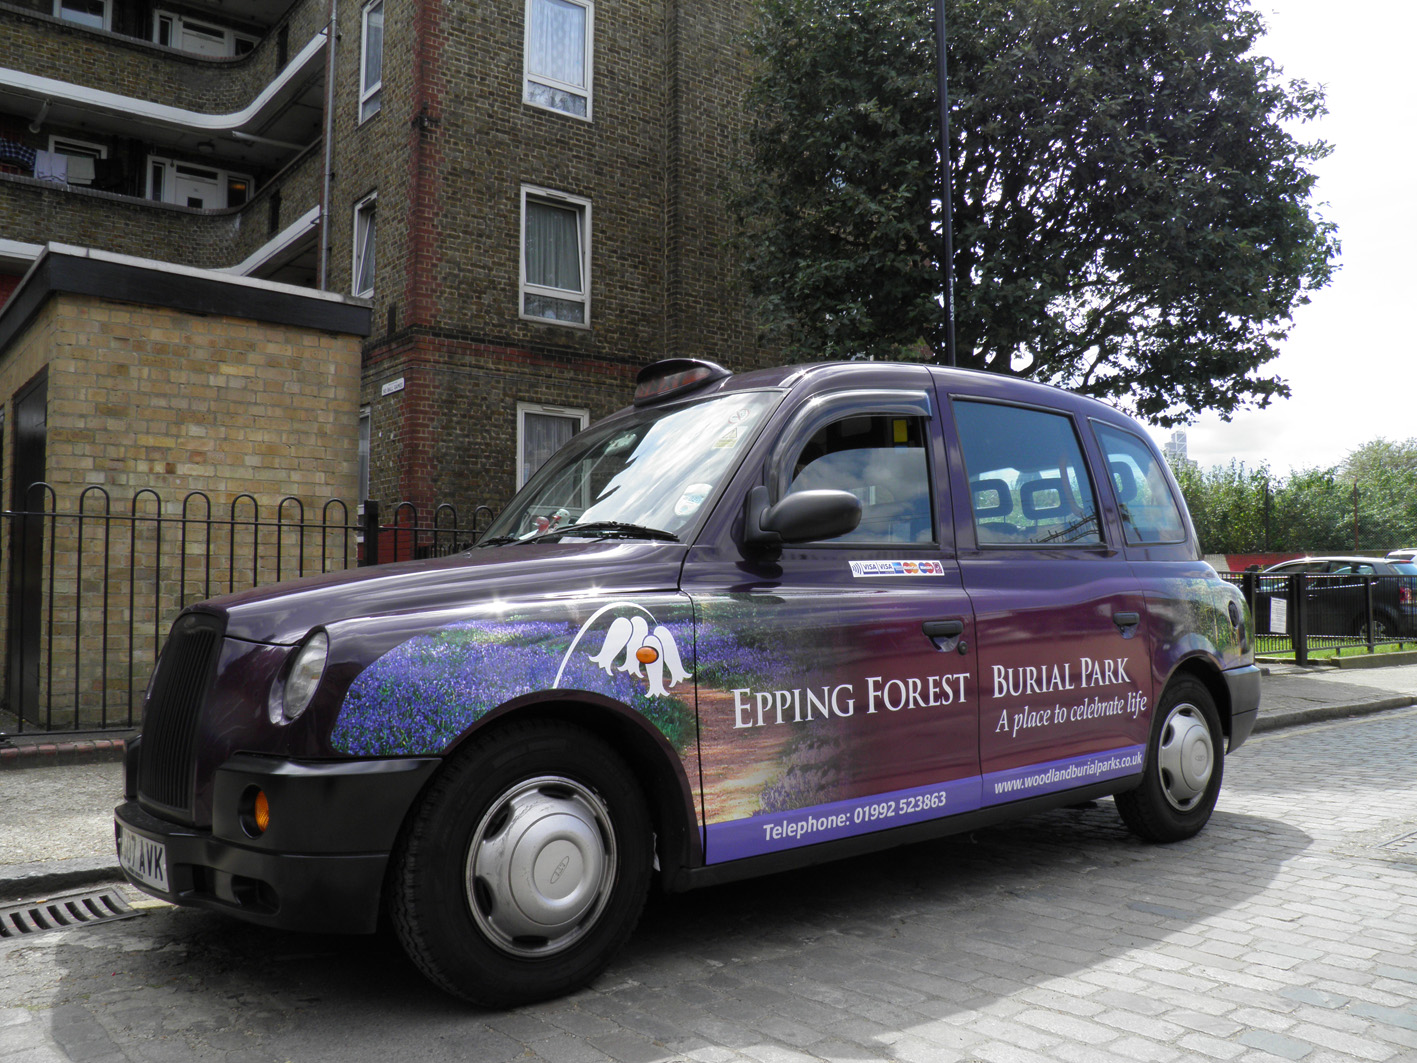 2011 Ubiquitous taxi advertising campaign for Woodland Burial Park - Epping Forest Burial Park